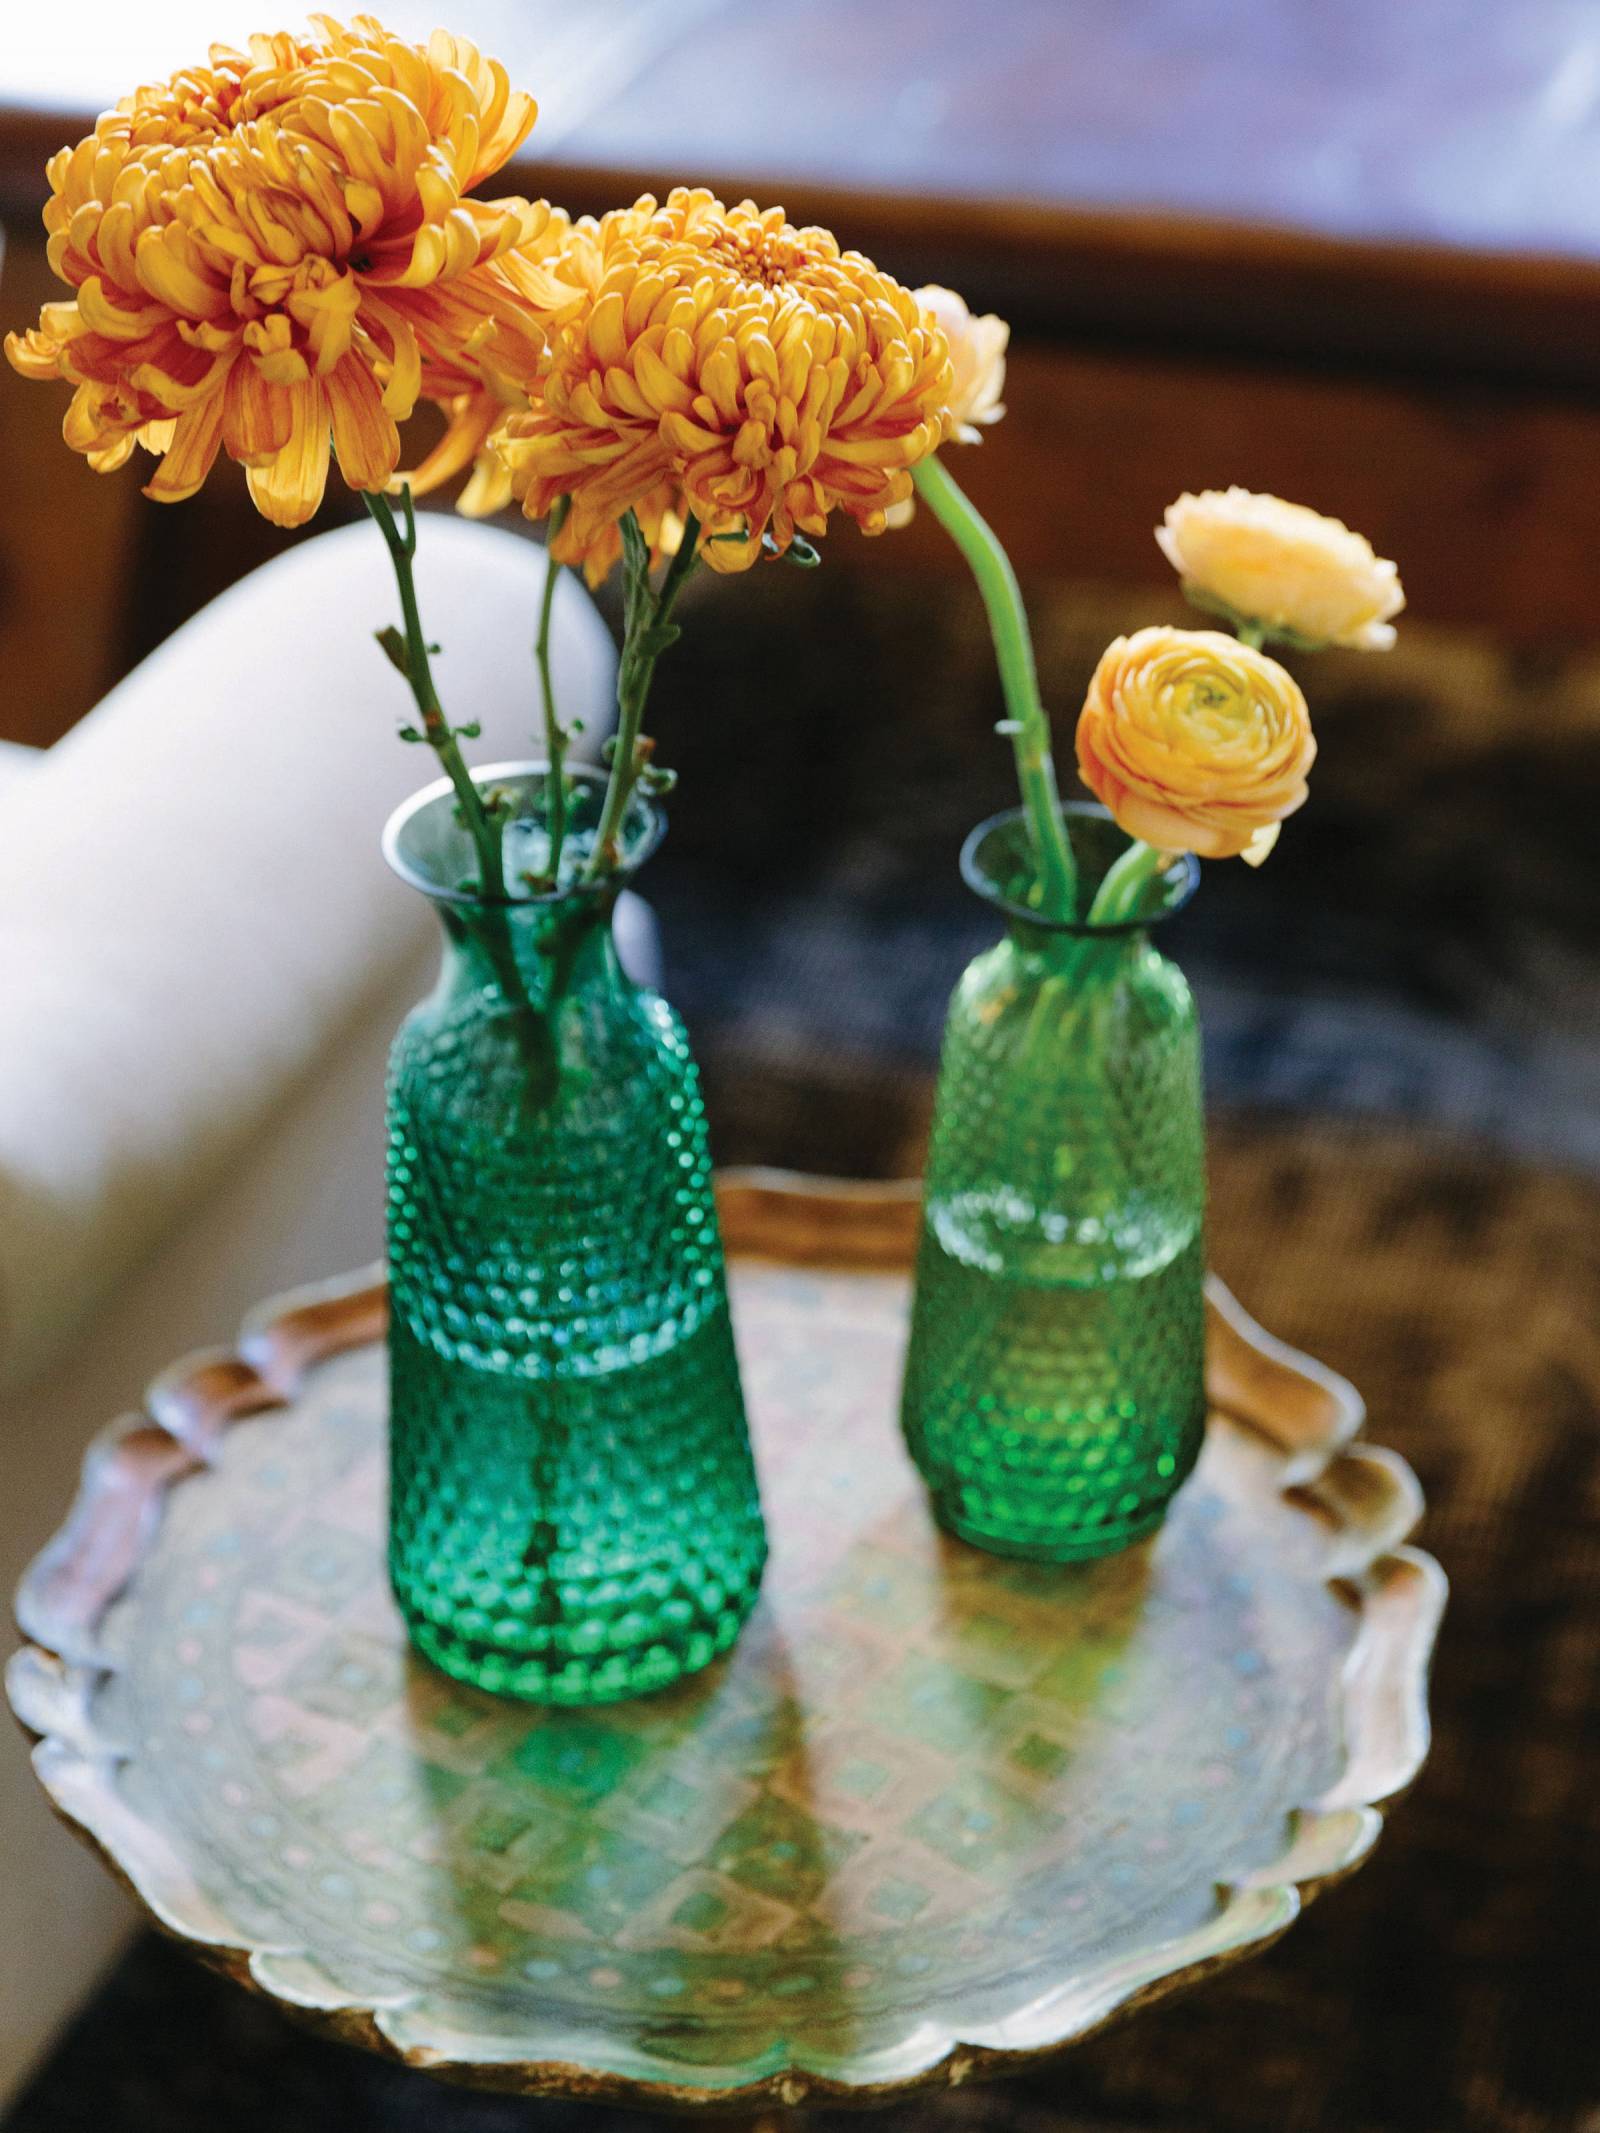 Vintage emerald green vases with orange and yellow flowers